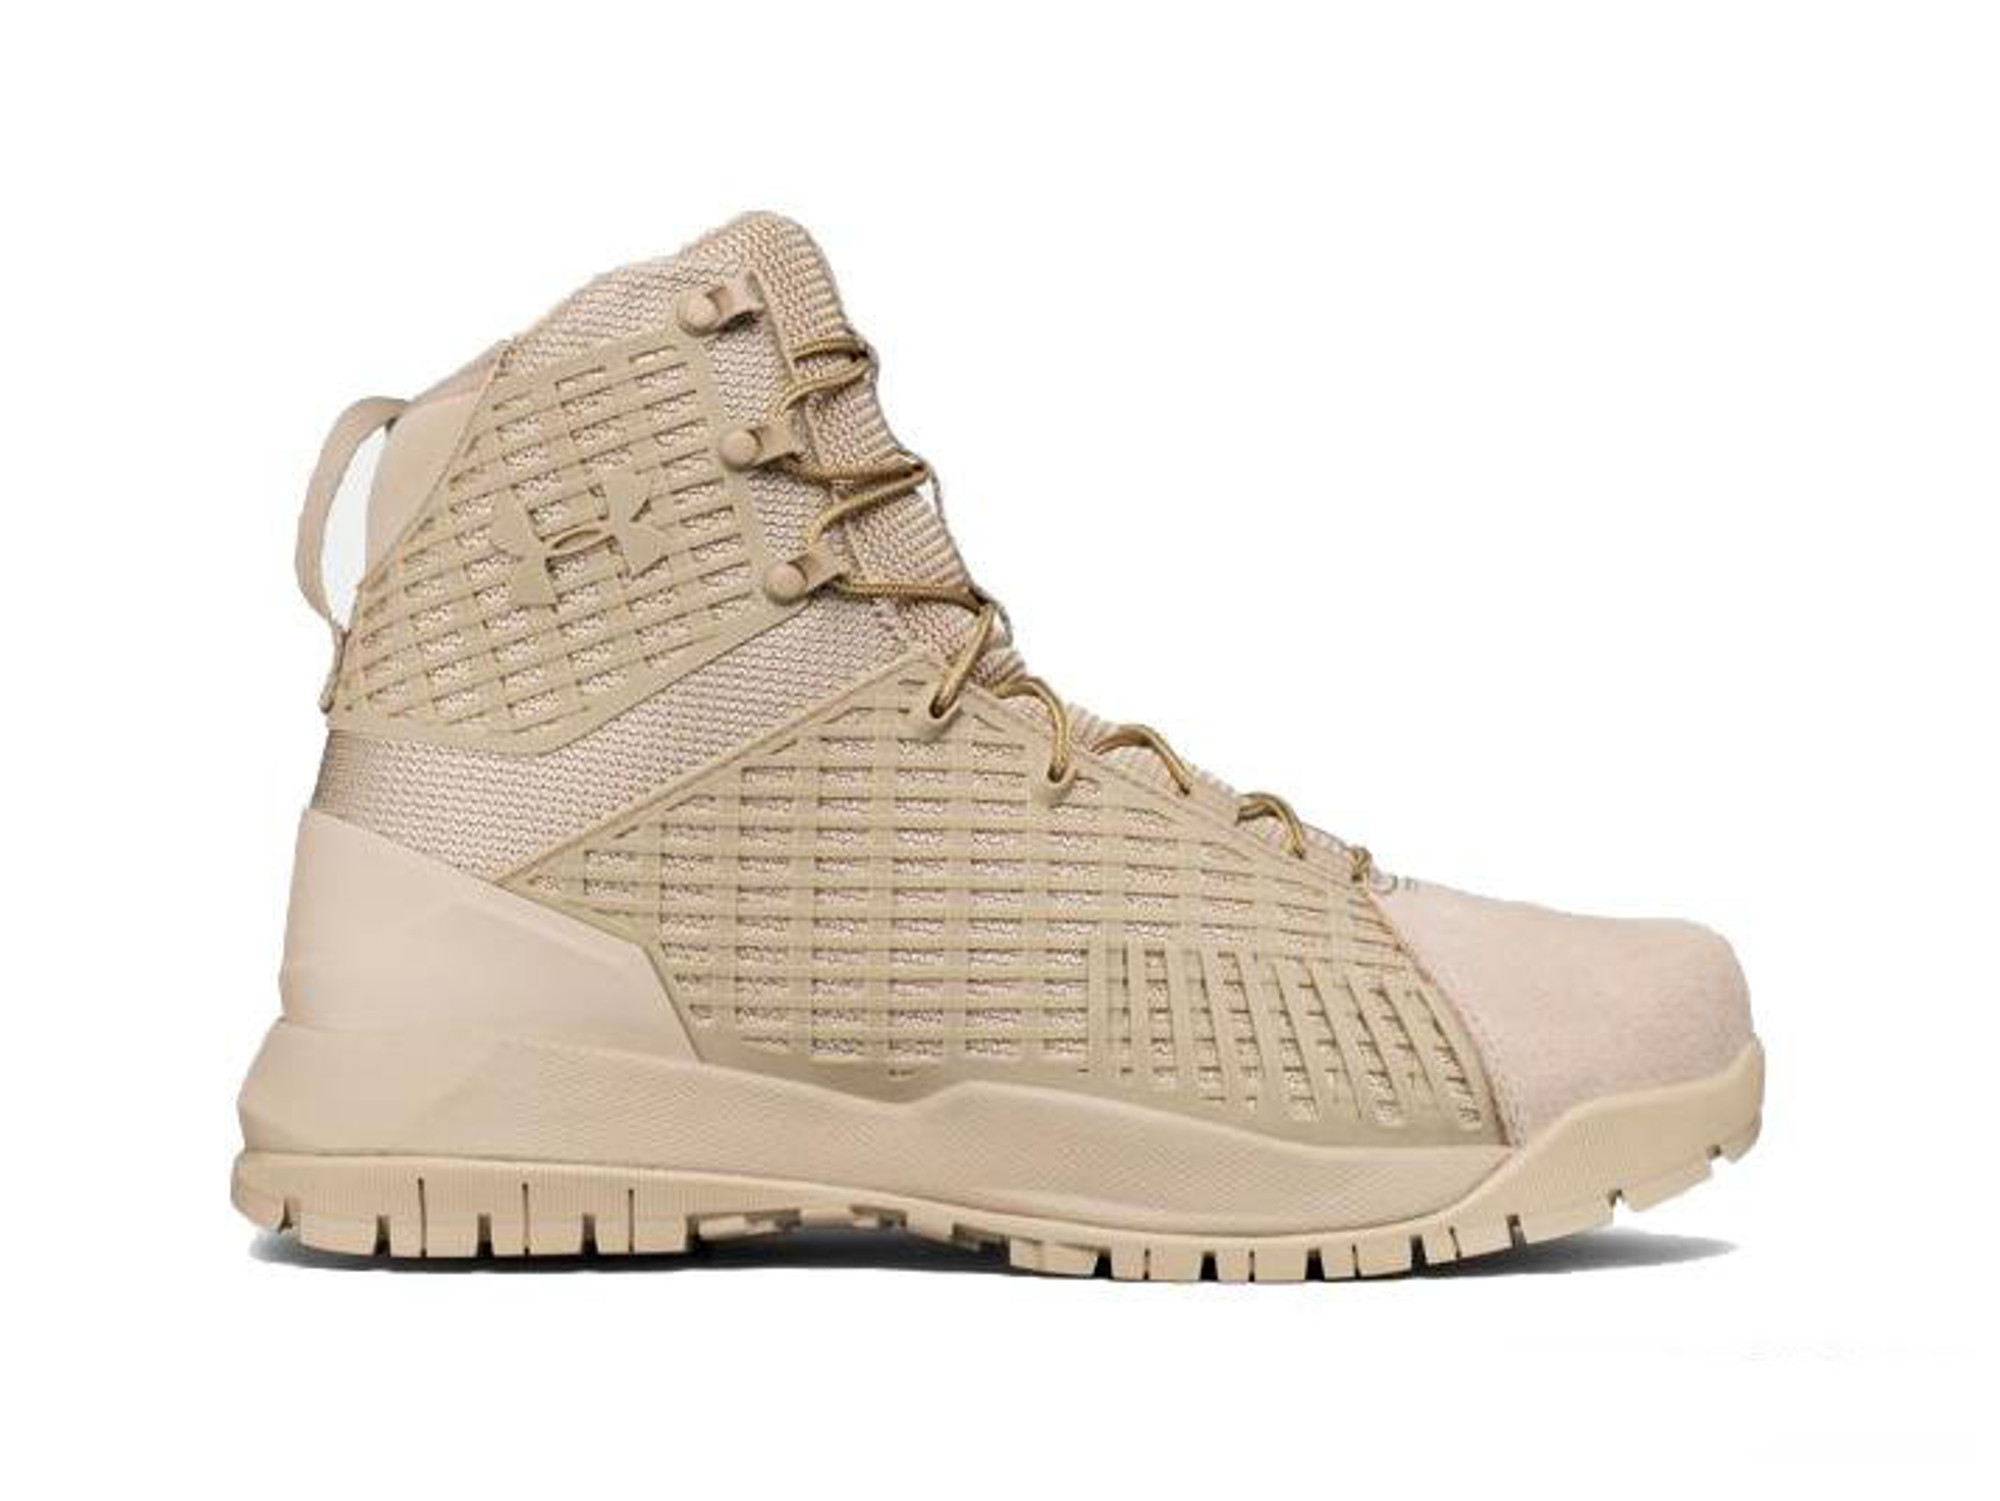 Under Armour UA Coyote Stryker Tac Boots